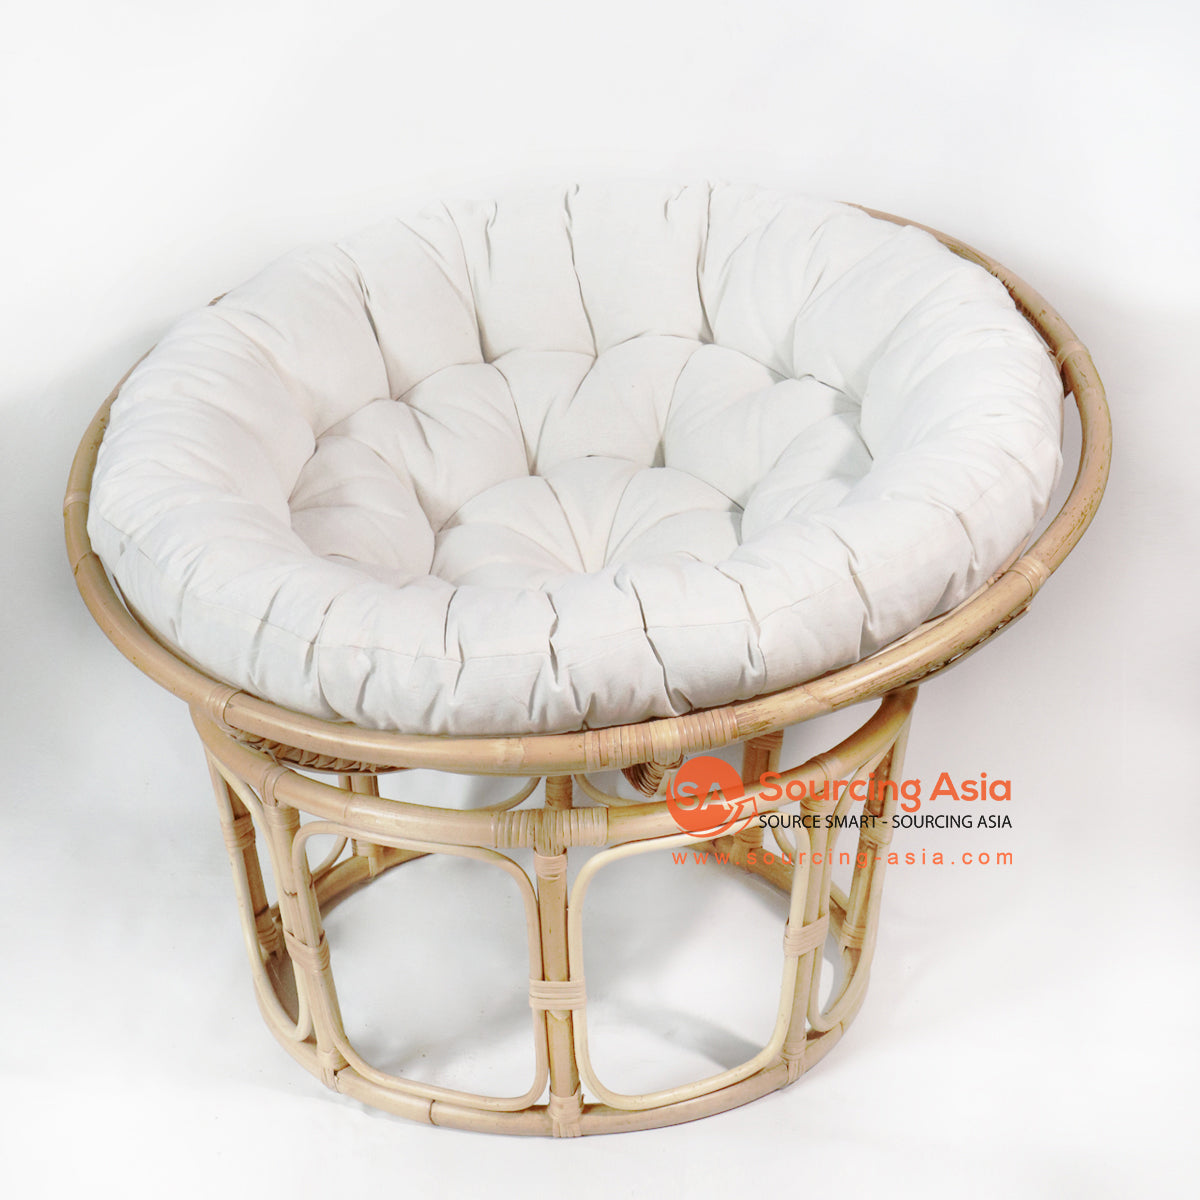 GEB002 NATURAL RATTAN ROUND CHAIR WITH WHITE CUSHION